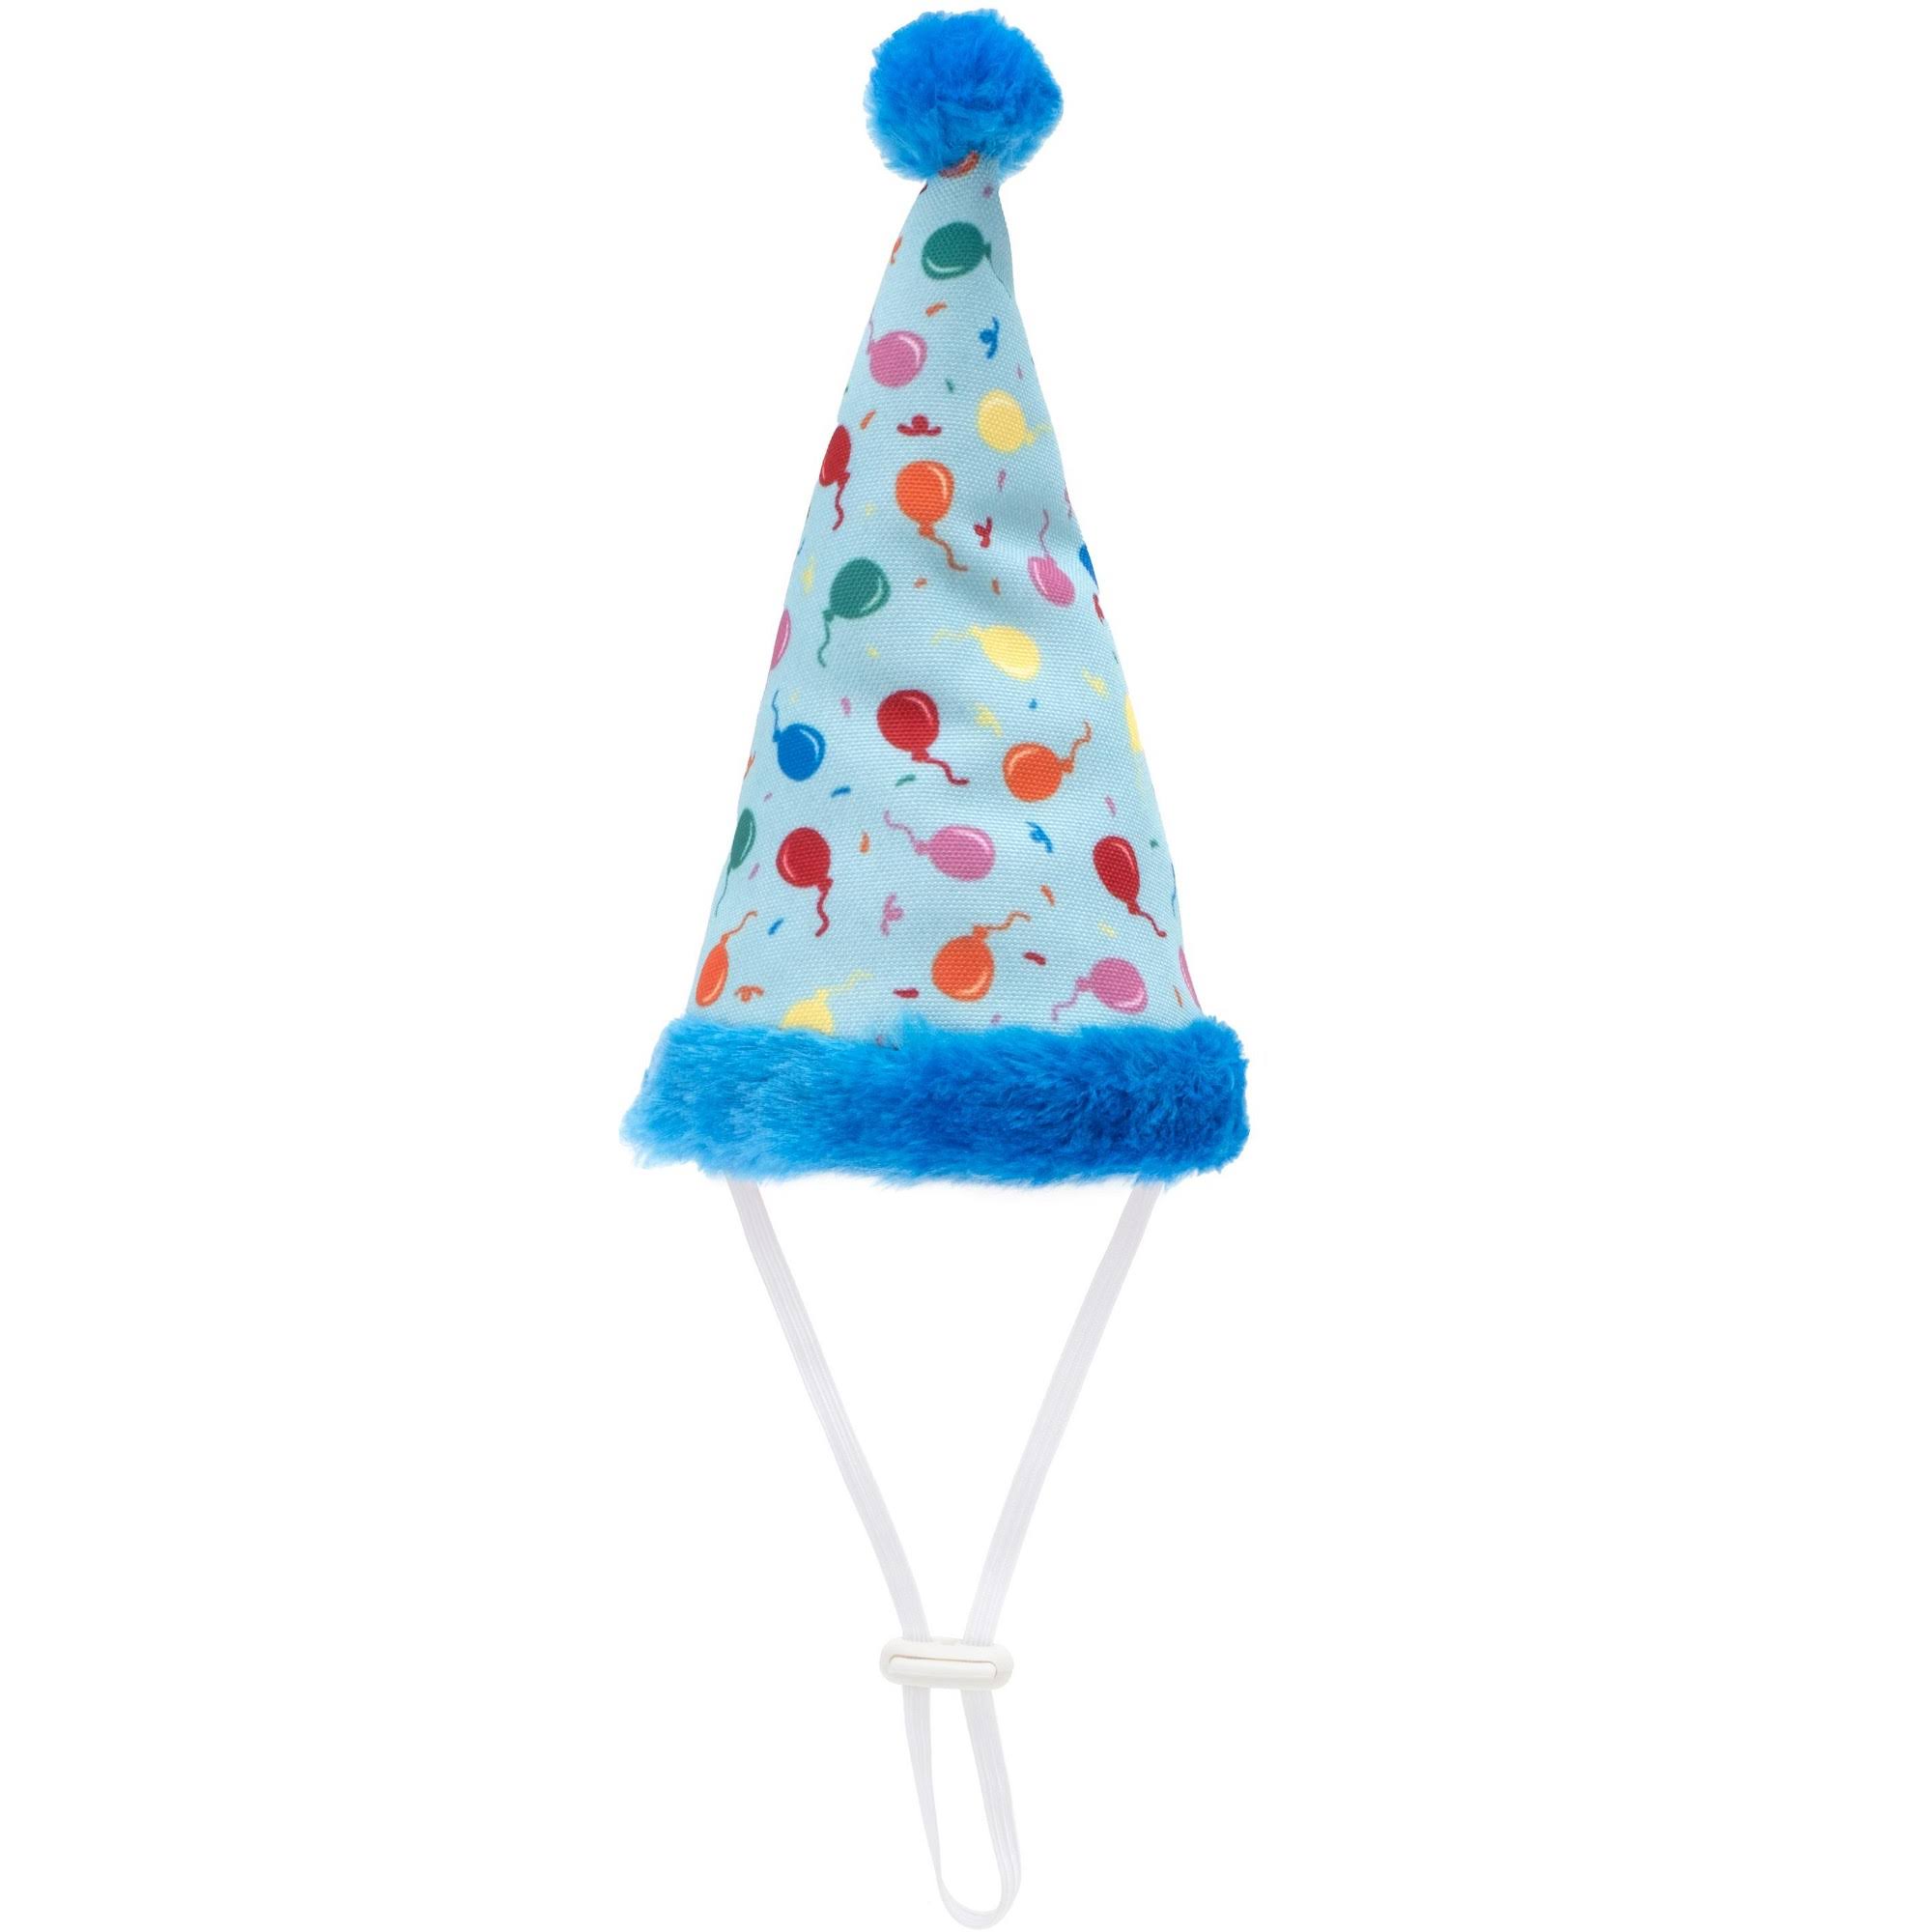 The Worthy Dog Blue Birthday Party Hat Small